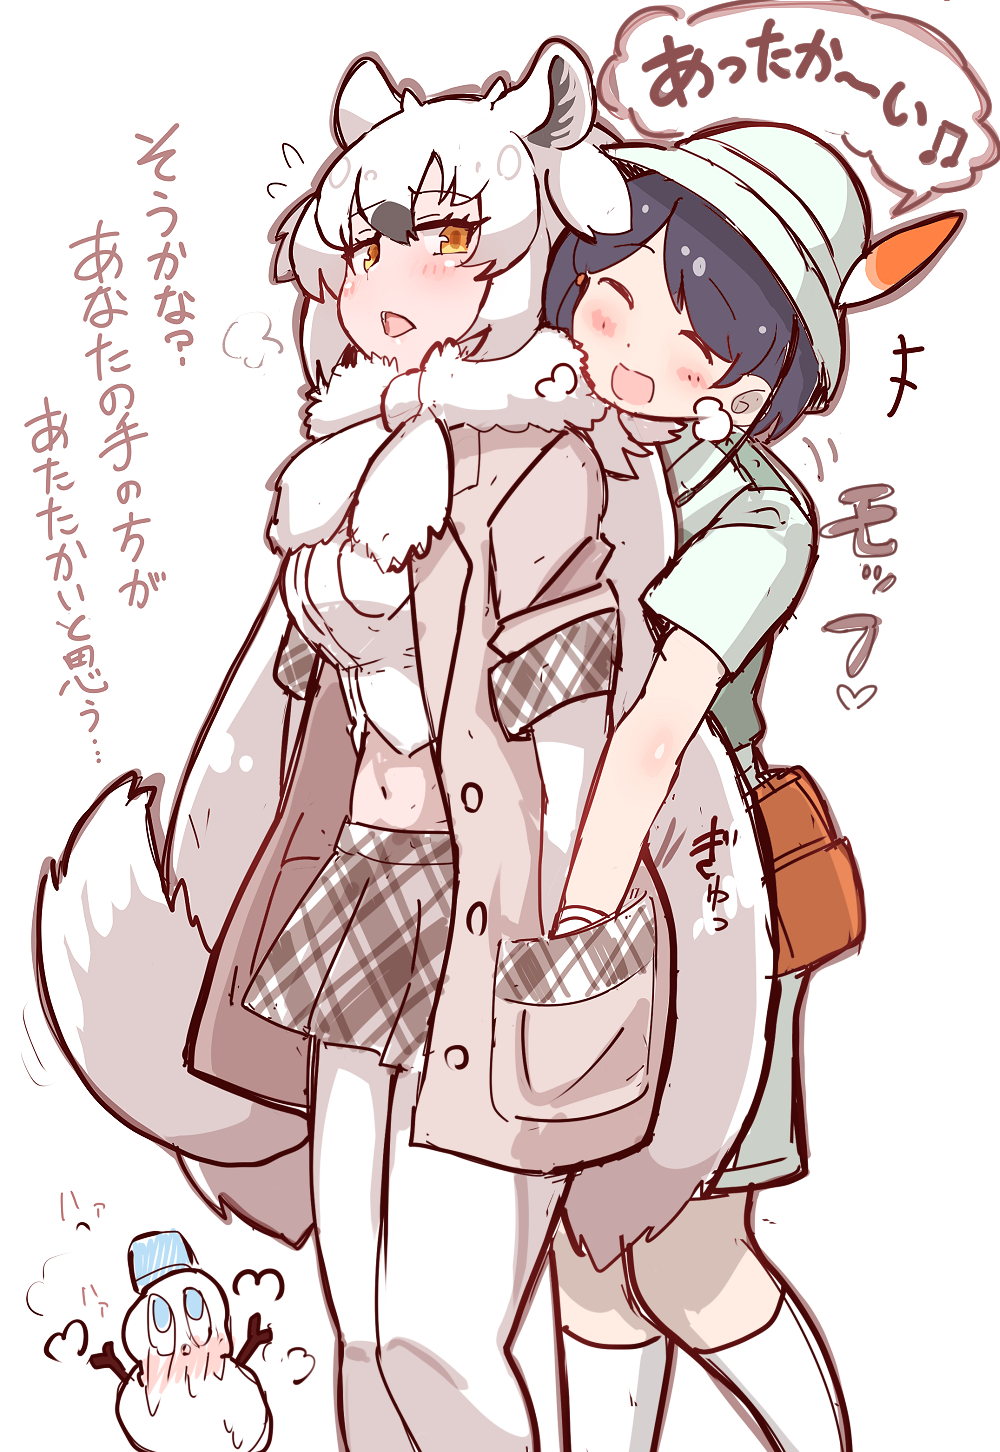 2girls animal_ears arctic_wolf_(kemono_friends) beige_shorts black_hair blush bucket_hat captain_(kemono_friends) commentary_request elbow_gloves embarrassed eyebrows_visible_through_hair fur_collar gloves grey_hair grey_jacket grey_skirt hair_tie hands_in_pockets hat hat_feather highres jacket kemono_friends kemono_friends_3 khakis long_hair midriff_peek multicolored_hair multiple_girls navel pantyhose plaid plaid_skirt plaid_trim pleated_skirt scarf shirt short_hair short_sleeves skirt snowman socks t-shirt tail tanaka_kusao translation_request white_gloves white_hair white_legwear white_scarf white_shirt wolf_ears wolf_girl wolf_tail yellow_eyes